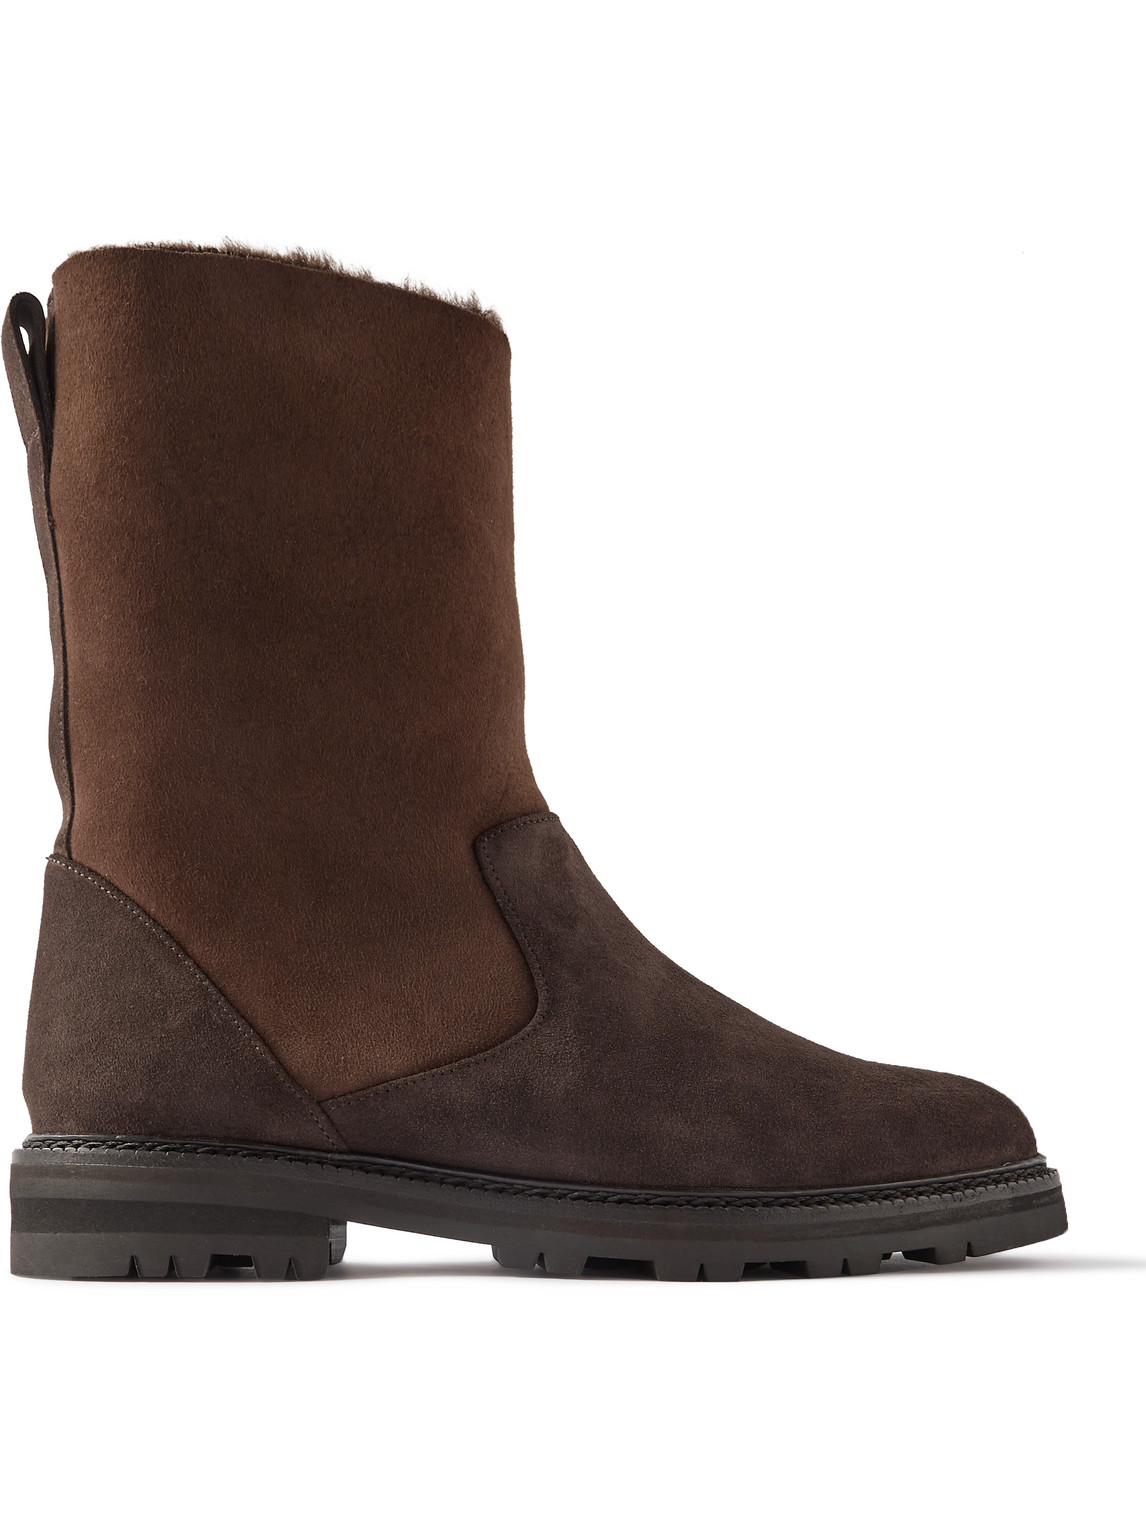 Tomoso Shearling-Lined Suede Boots